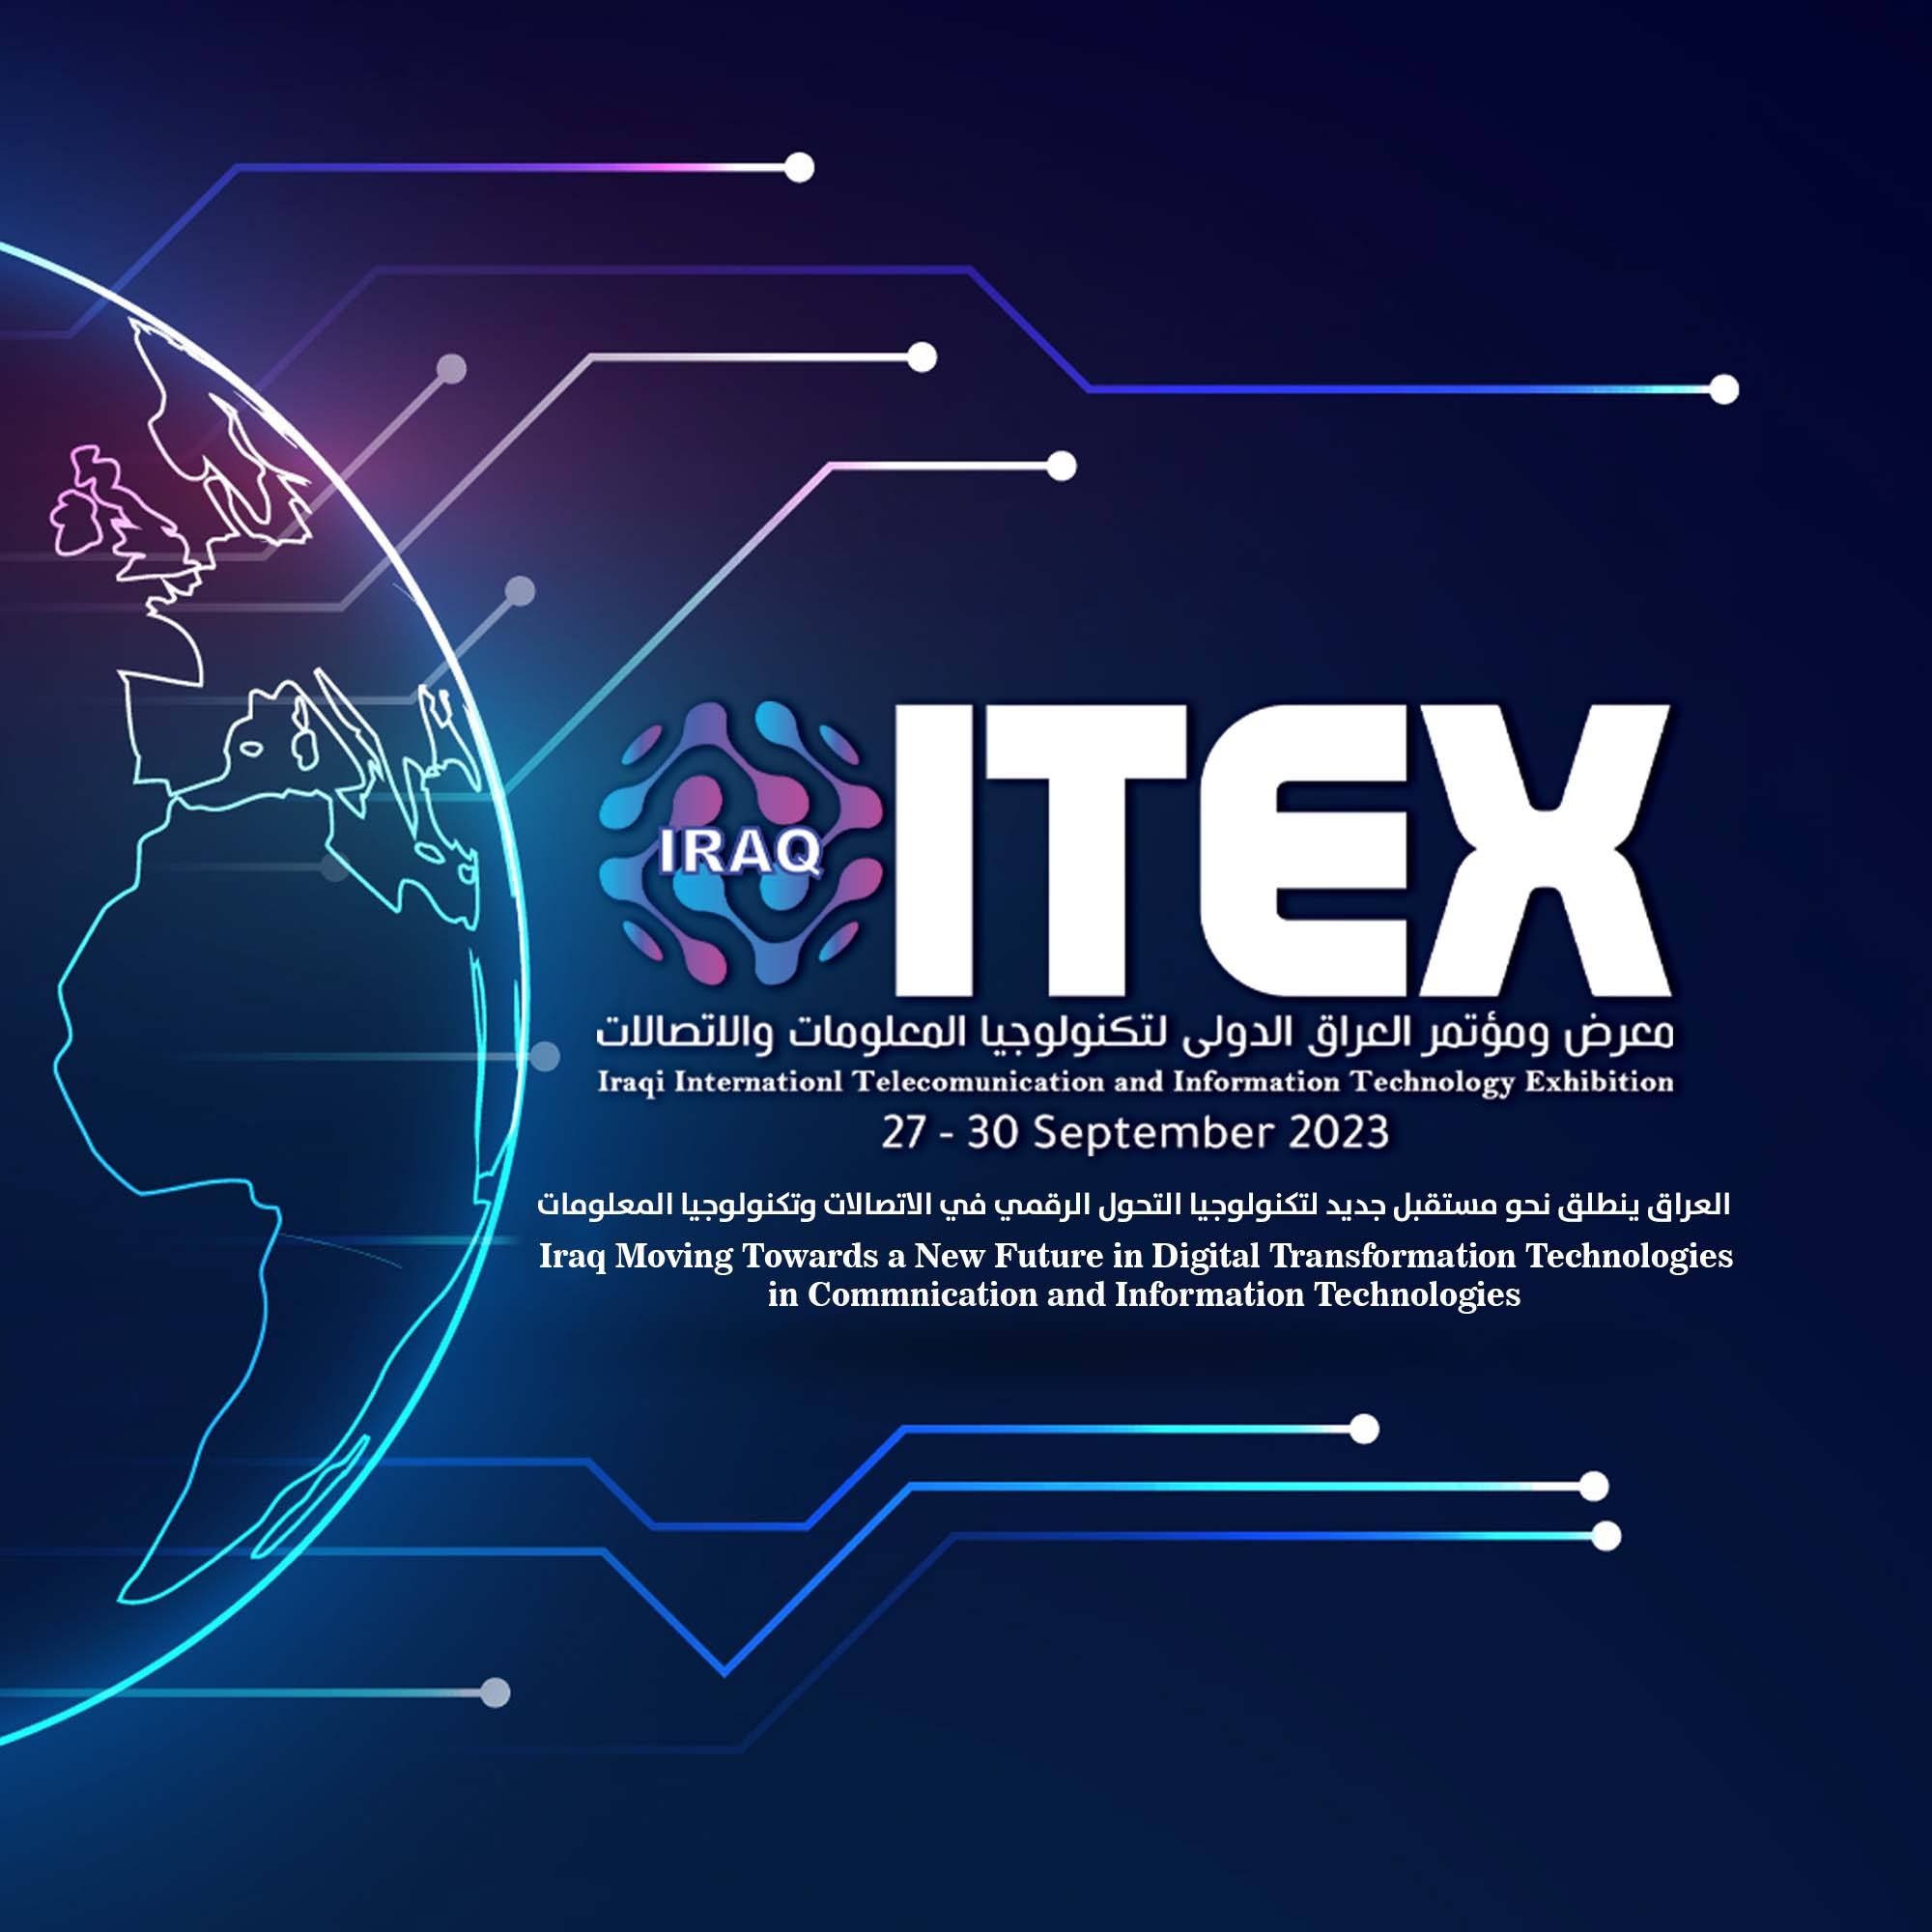 ITEX 2023: A Thrilling Experience of Innovation and Opportunity